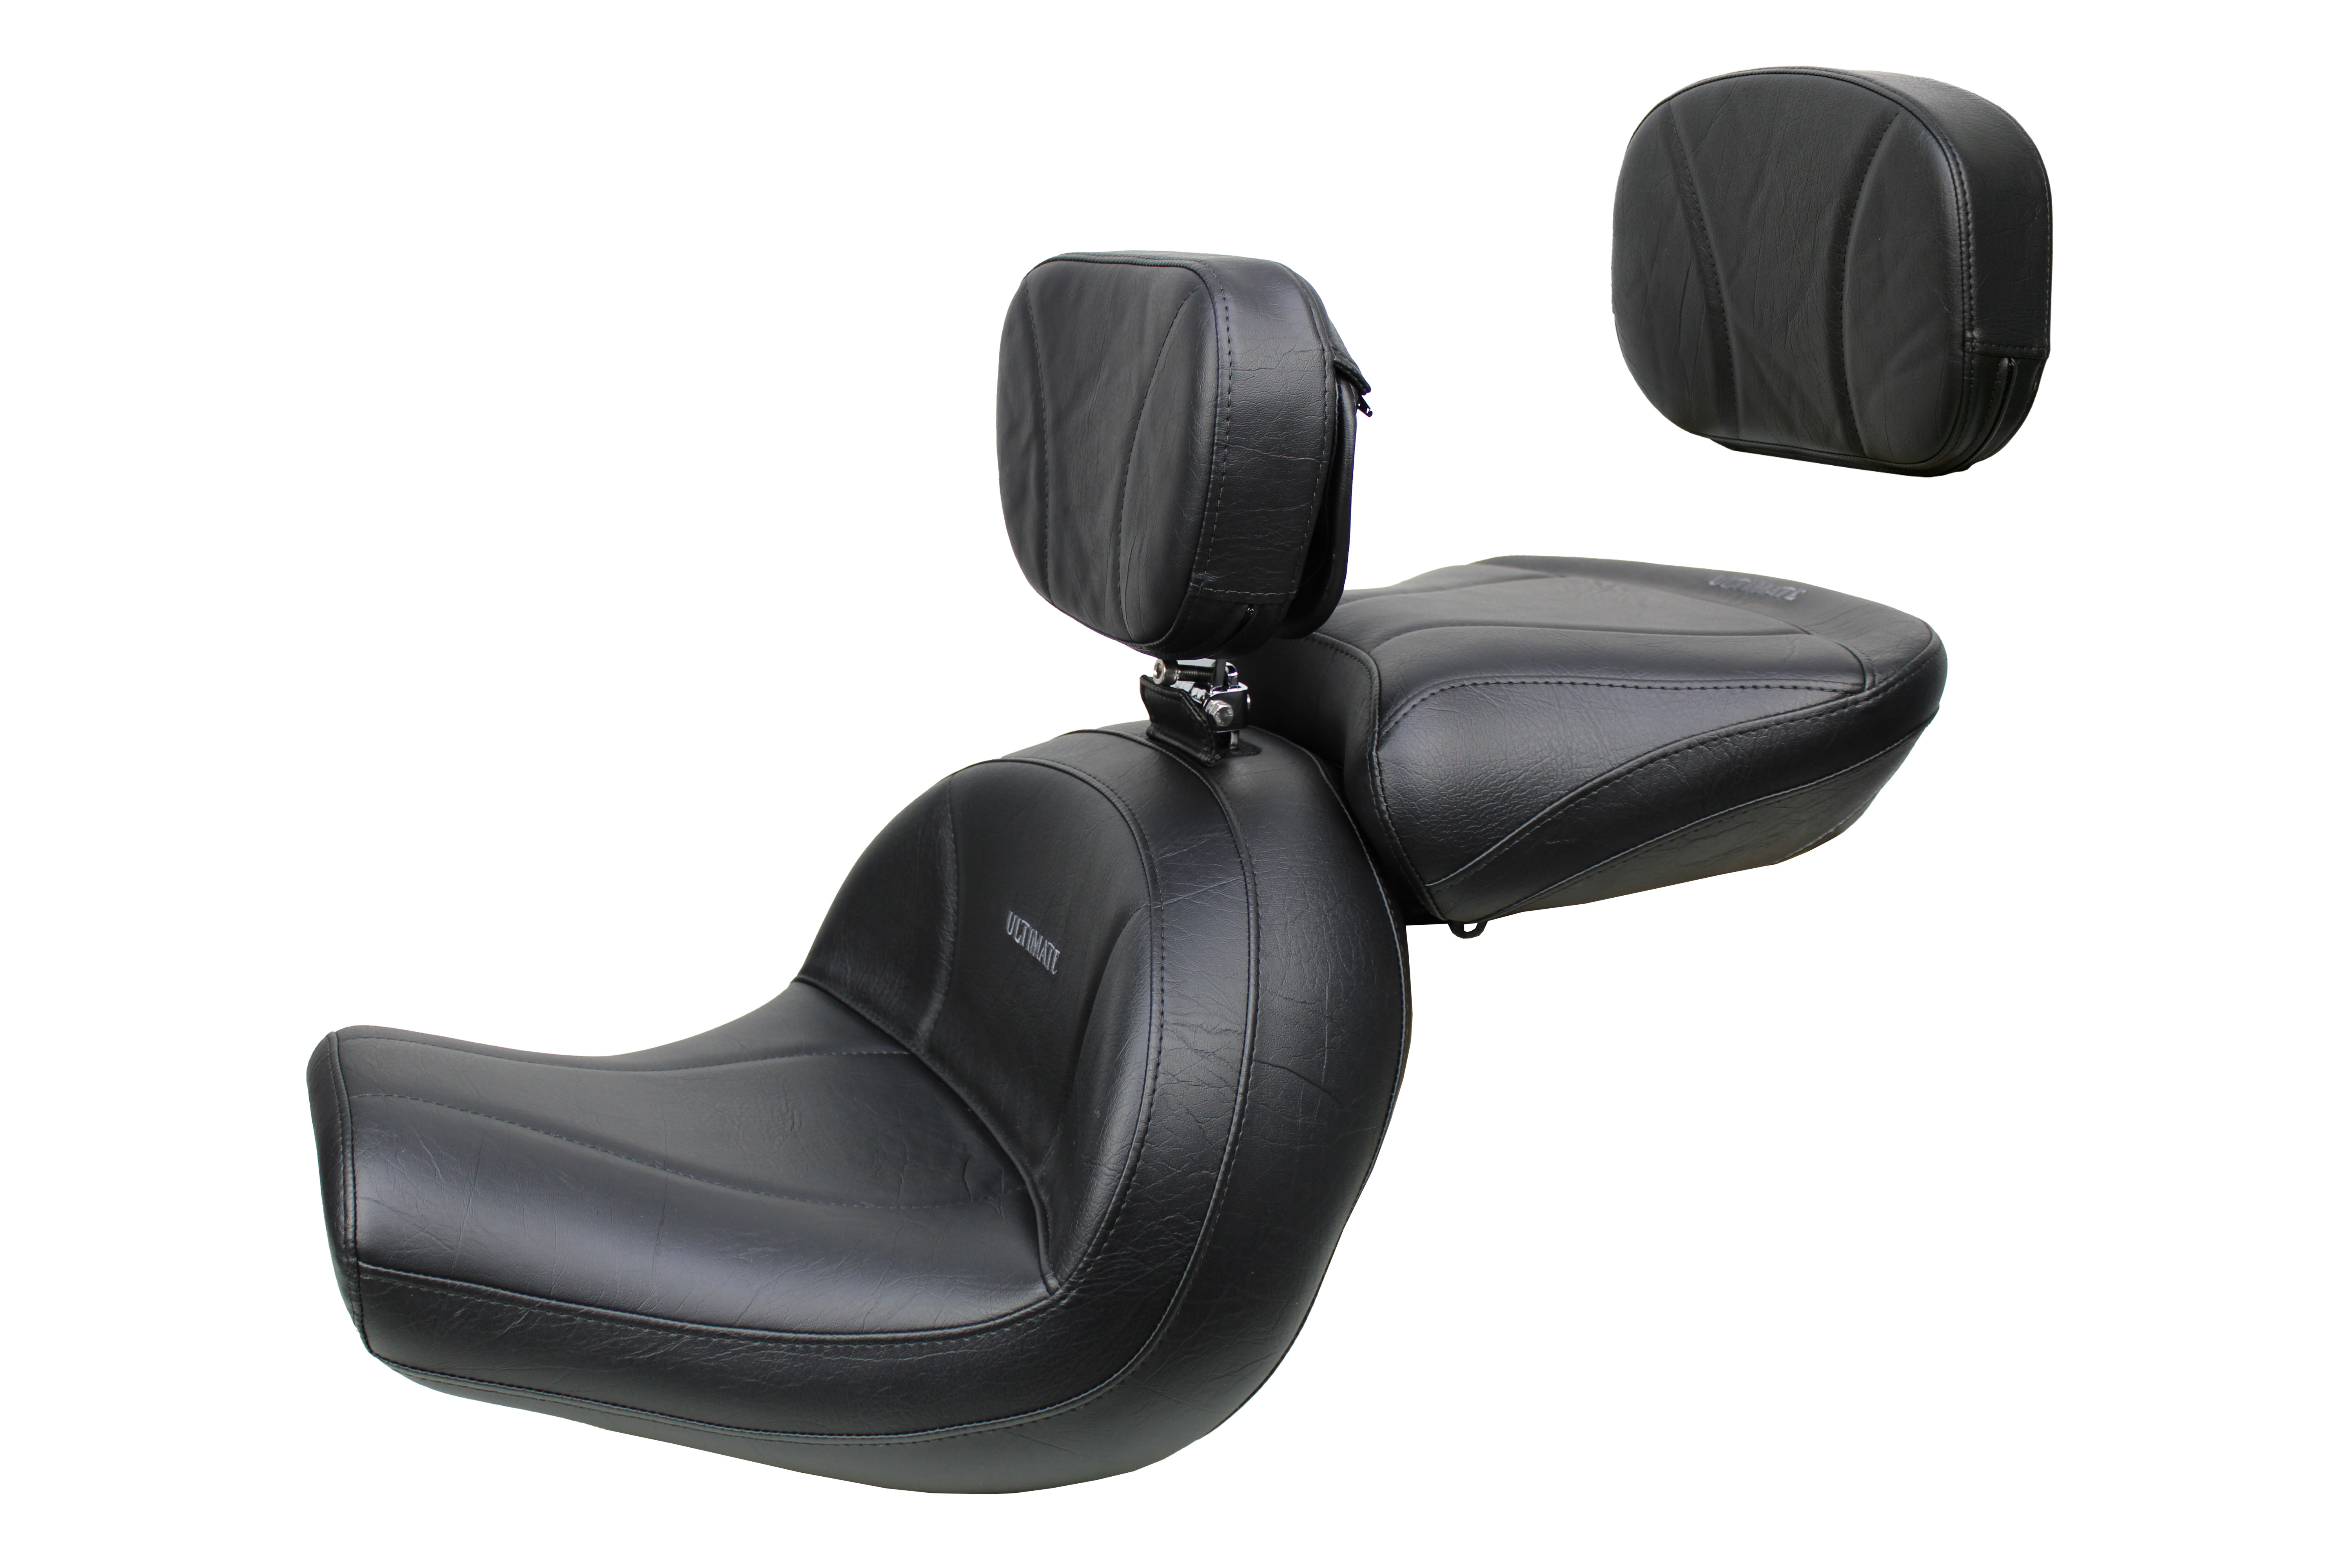 VTX 1300 R/S/T Lowrider Seat, Passenger Seat, Driver Backrest and Sissy Bar Pad - Plain or Studded